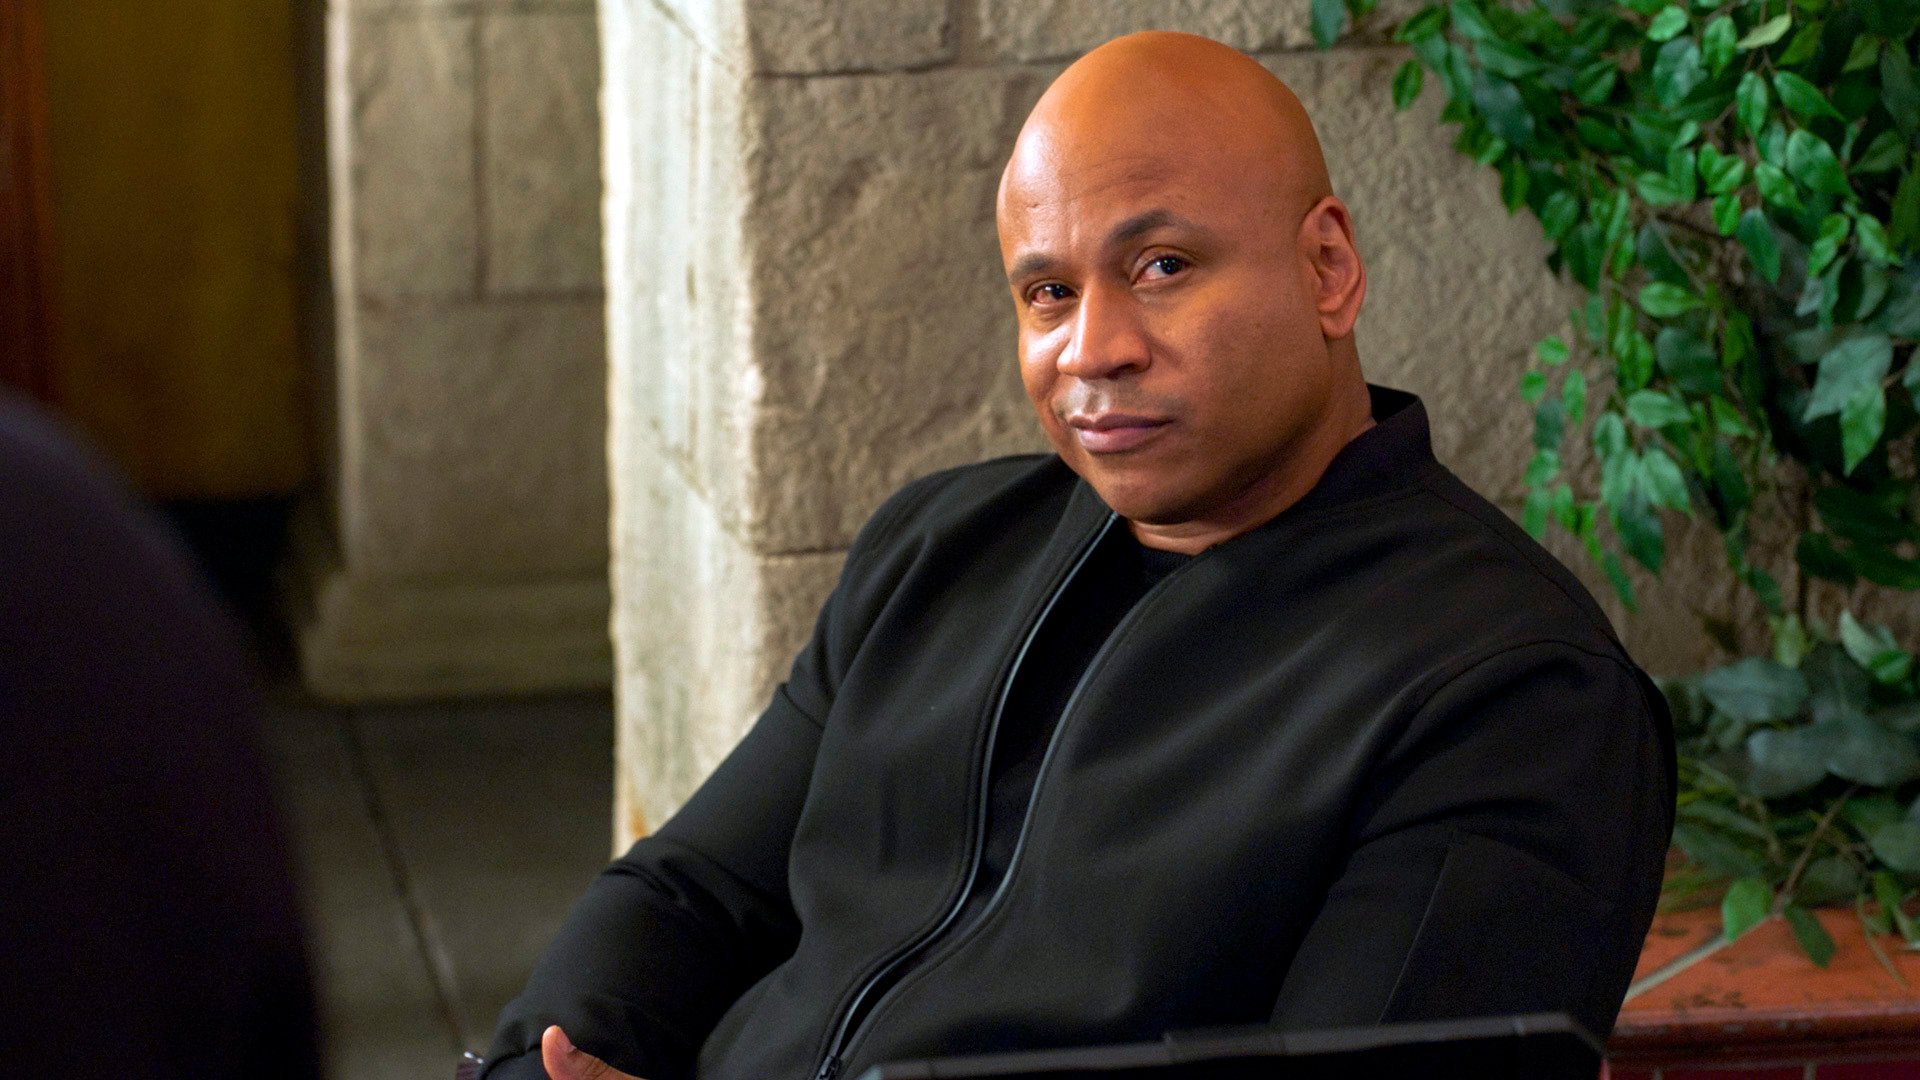 LL Cool J on the set of NCIS: Los Angeles |  CBS via Getty Images